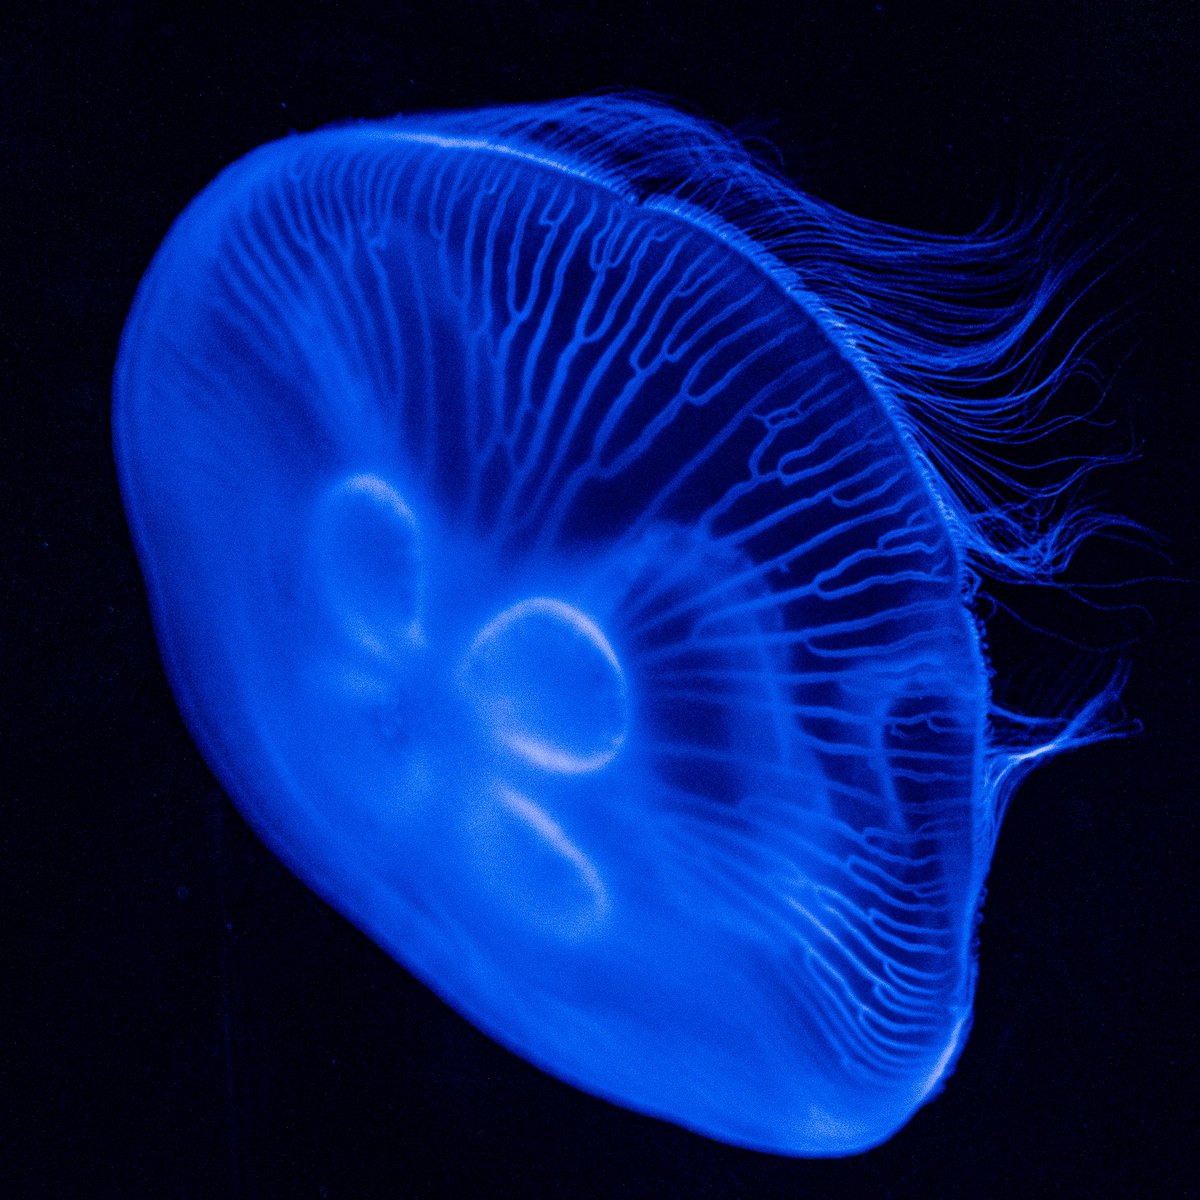 When you realise that jellyfish look like actual phylogenetic trees and start obsessing over it …#phylogenetictree